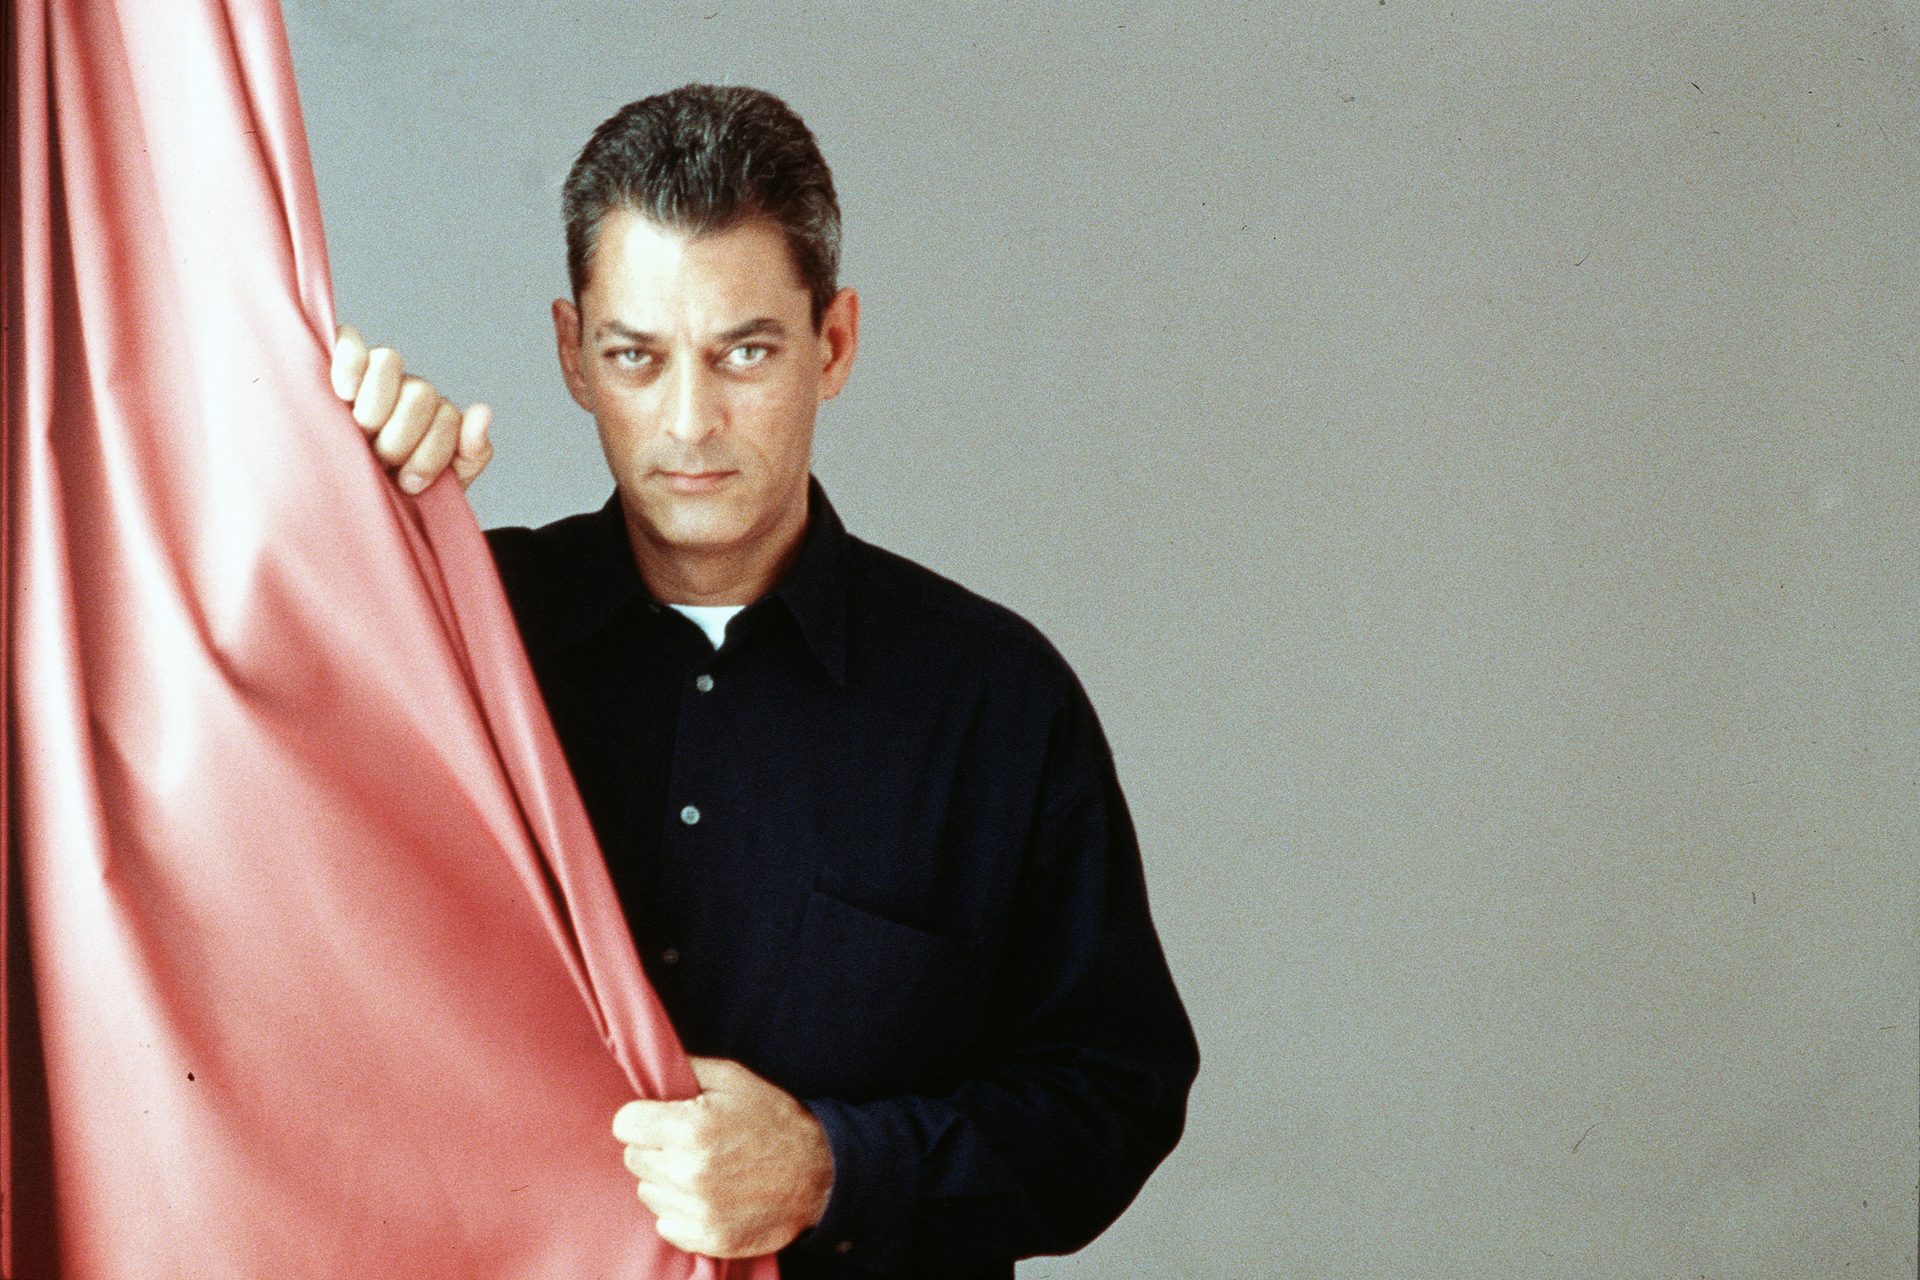 <p>Novelist Paul Auster, known among others for his 'New York Trilogy', 'Moon Palace,' 'Leviathan,' 'Mr. Vertigo,' and 'Sunset Park,' passed away at age 77 from cancer.</p> <p><a href="https://www.msn.com/en-us/channel/source/Showbizz%20Daily%20English/sr-vid-w8hcuhvu3f8qr5wn5rk8xhsu5x8irqrgtxcypg4uxvn7tq9vkkfa?cvid=cddbc5c4fc9748a196a59c4cb5f3d12a&ei=7" rel="noopener">Follow Showbizz Daily to see the best photo galleries every day</a></p>